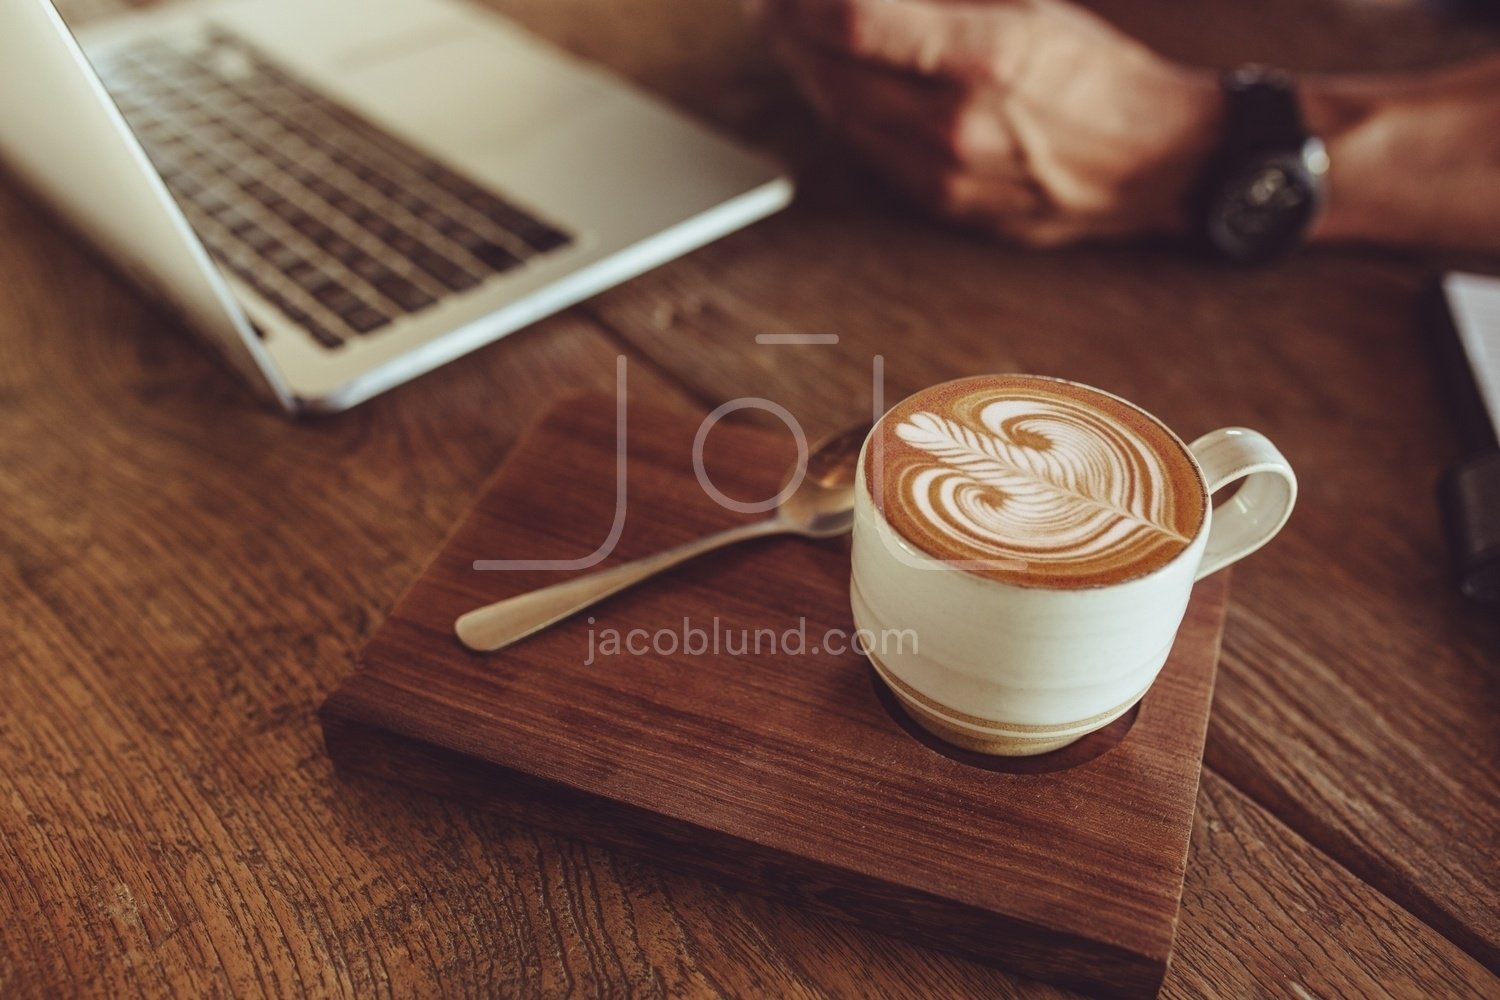 Premium Photo  Hot coffee capuccino cup with latte art on wood